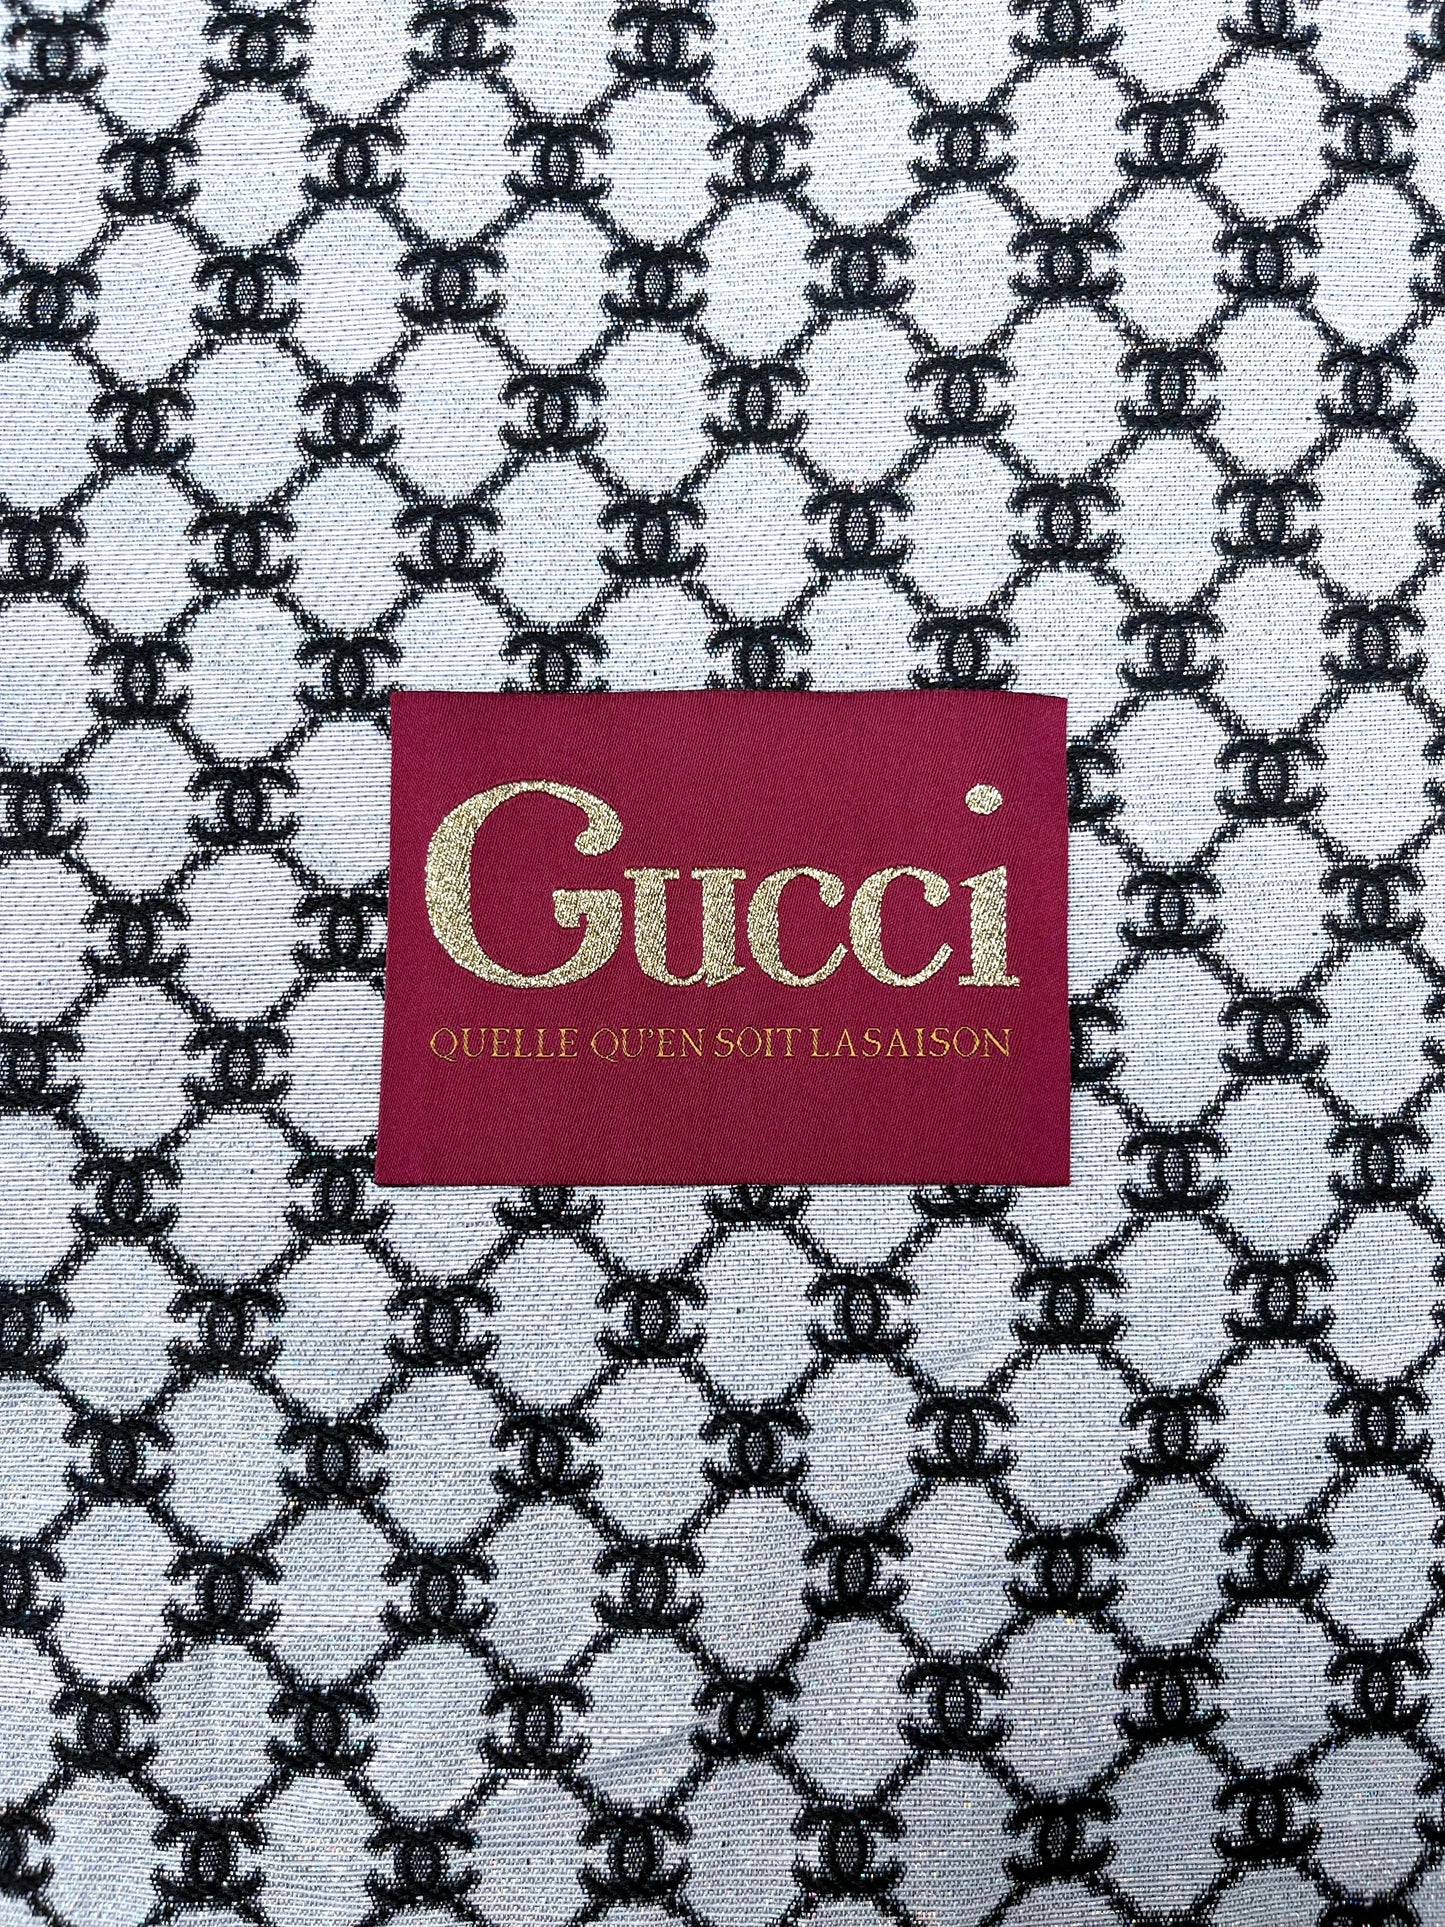 Handmade Sewing Gucci Label Tags for Handmade DIY